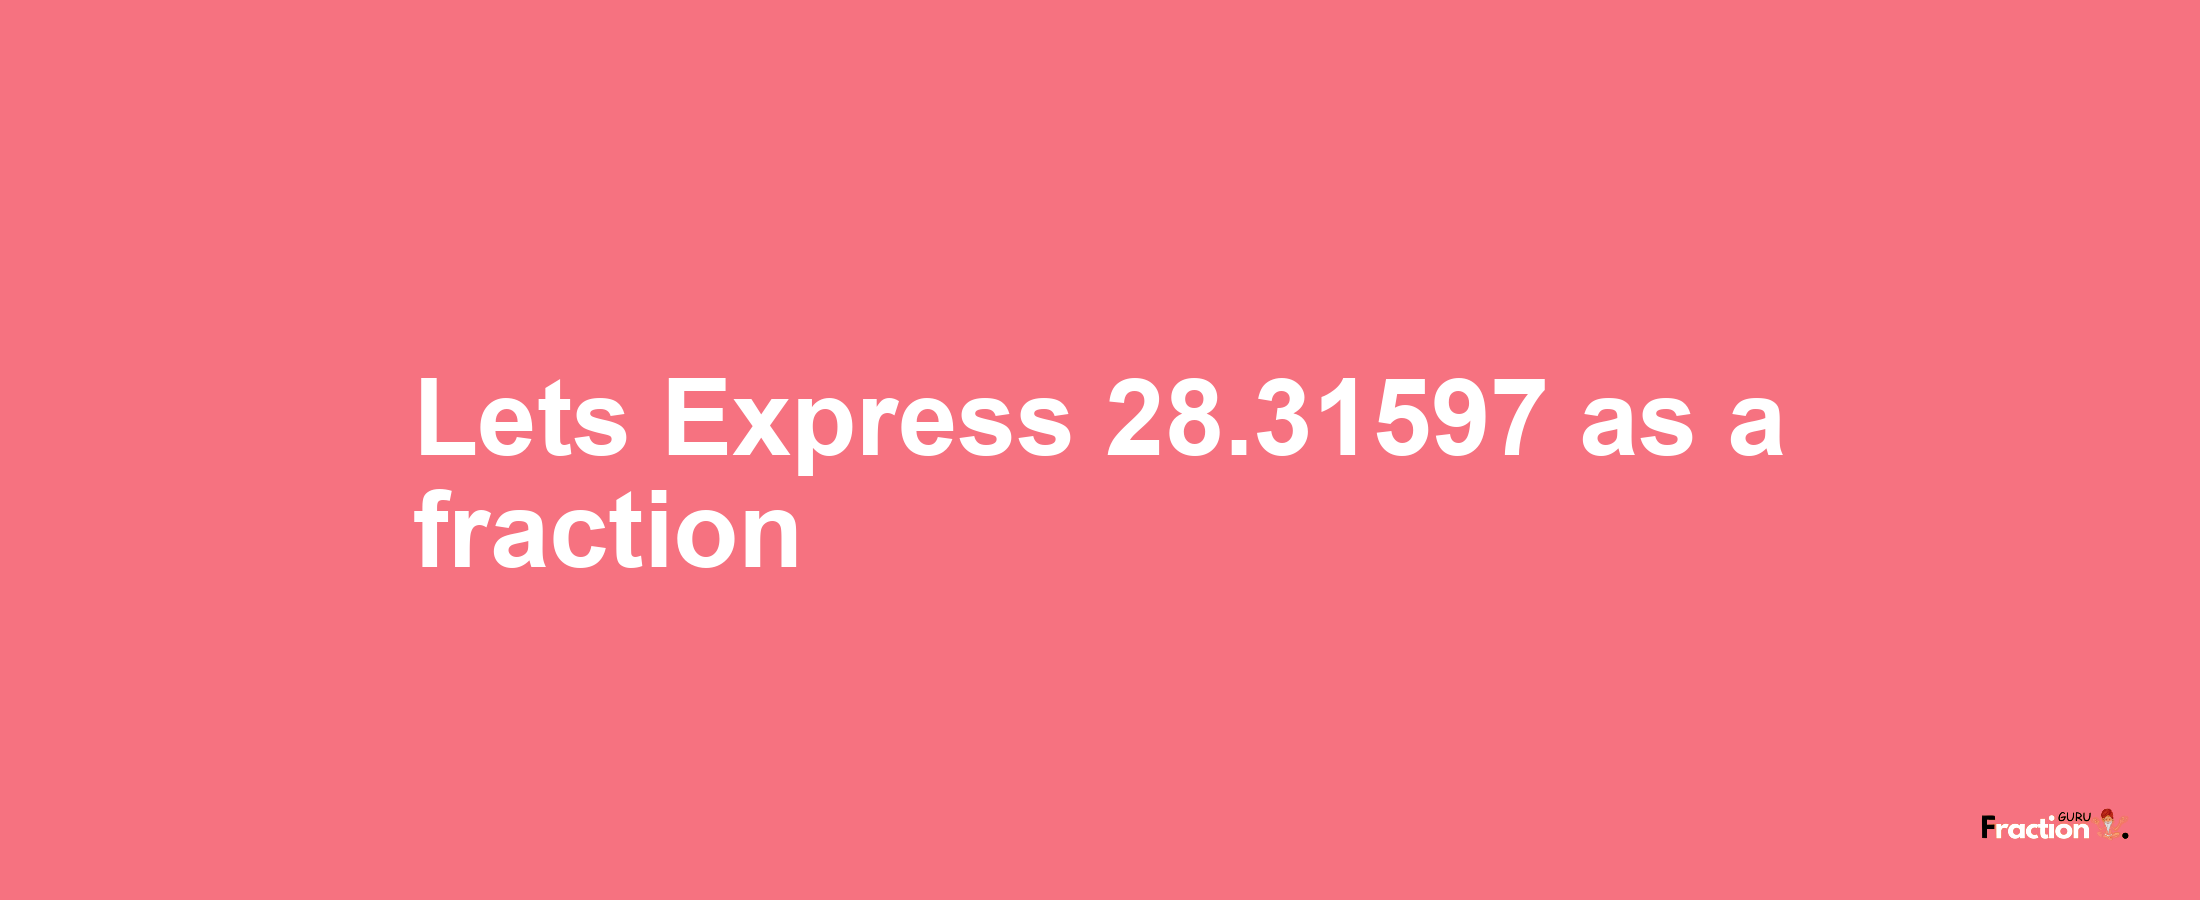 Lets Express 28.31597 as afraction